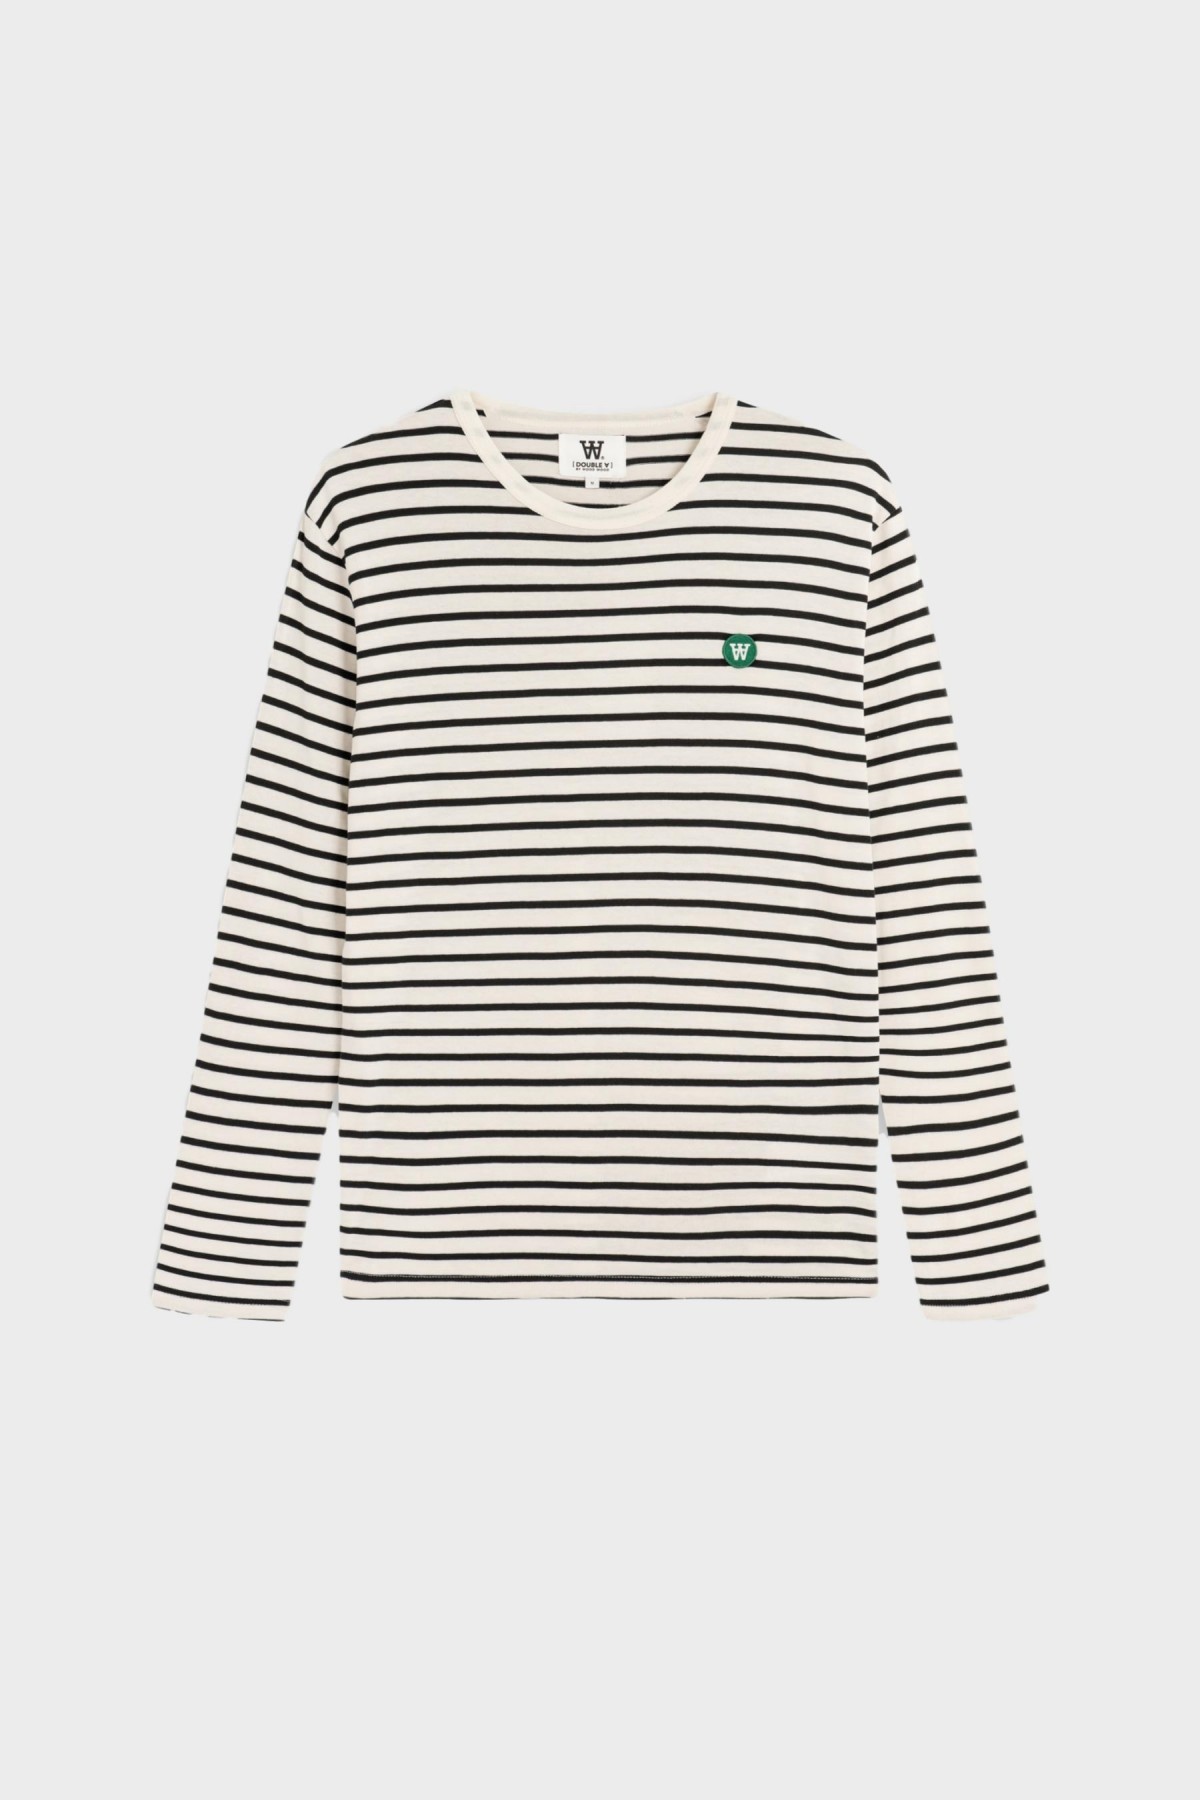 Wood Wood Mel Long Sleeve in Off White / Navy Stripes 